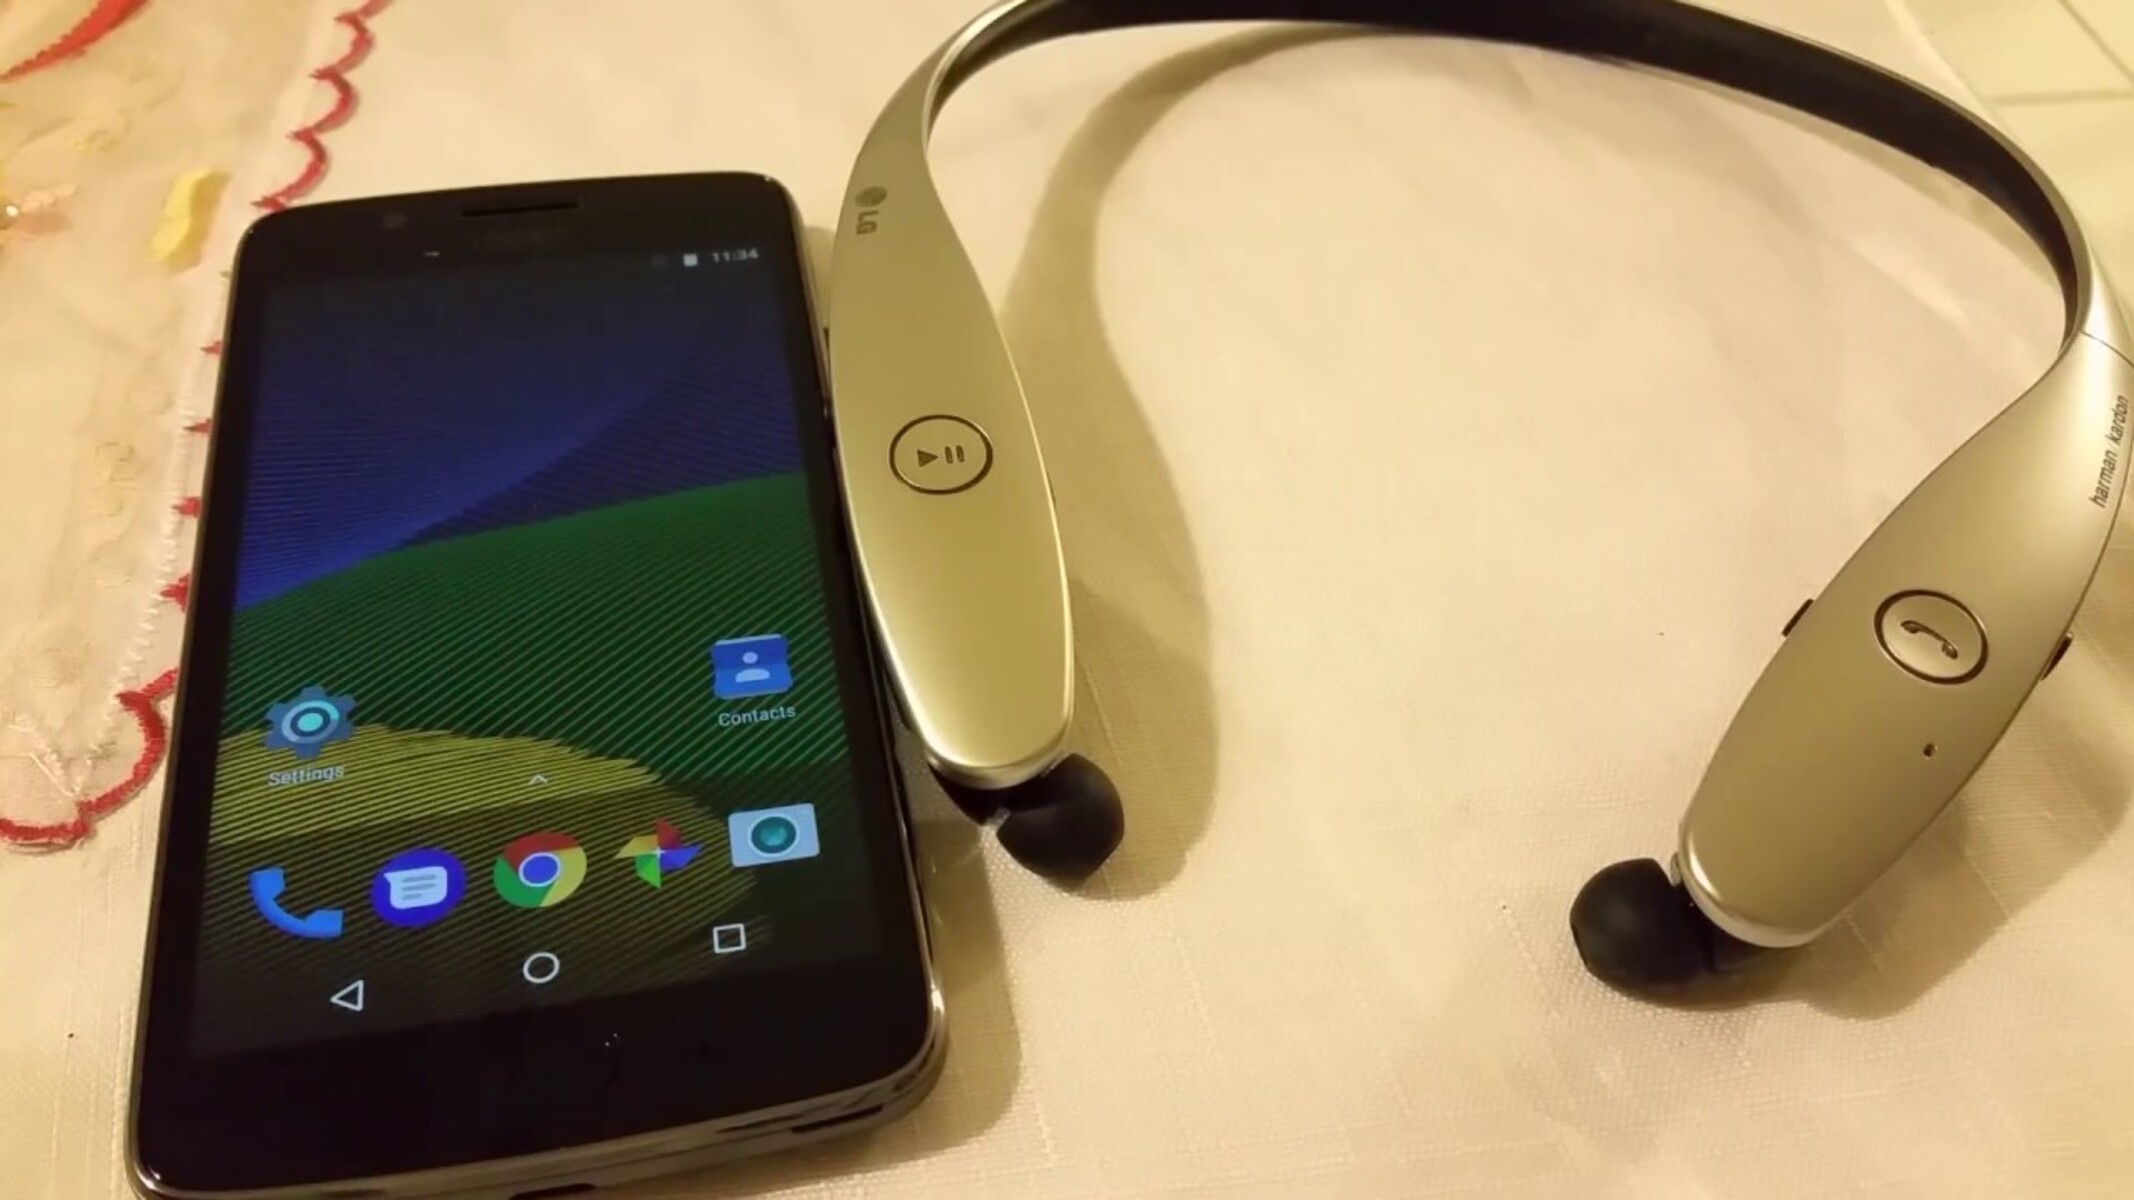 LG Headset Pairing: Step-by-Step Guide To Pairing Bluetooth Headset With Phone